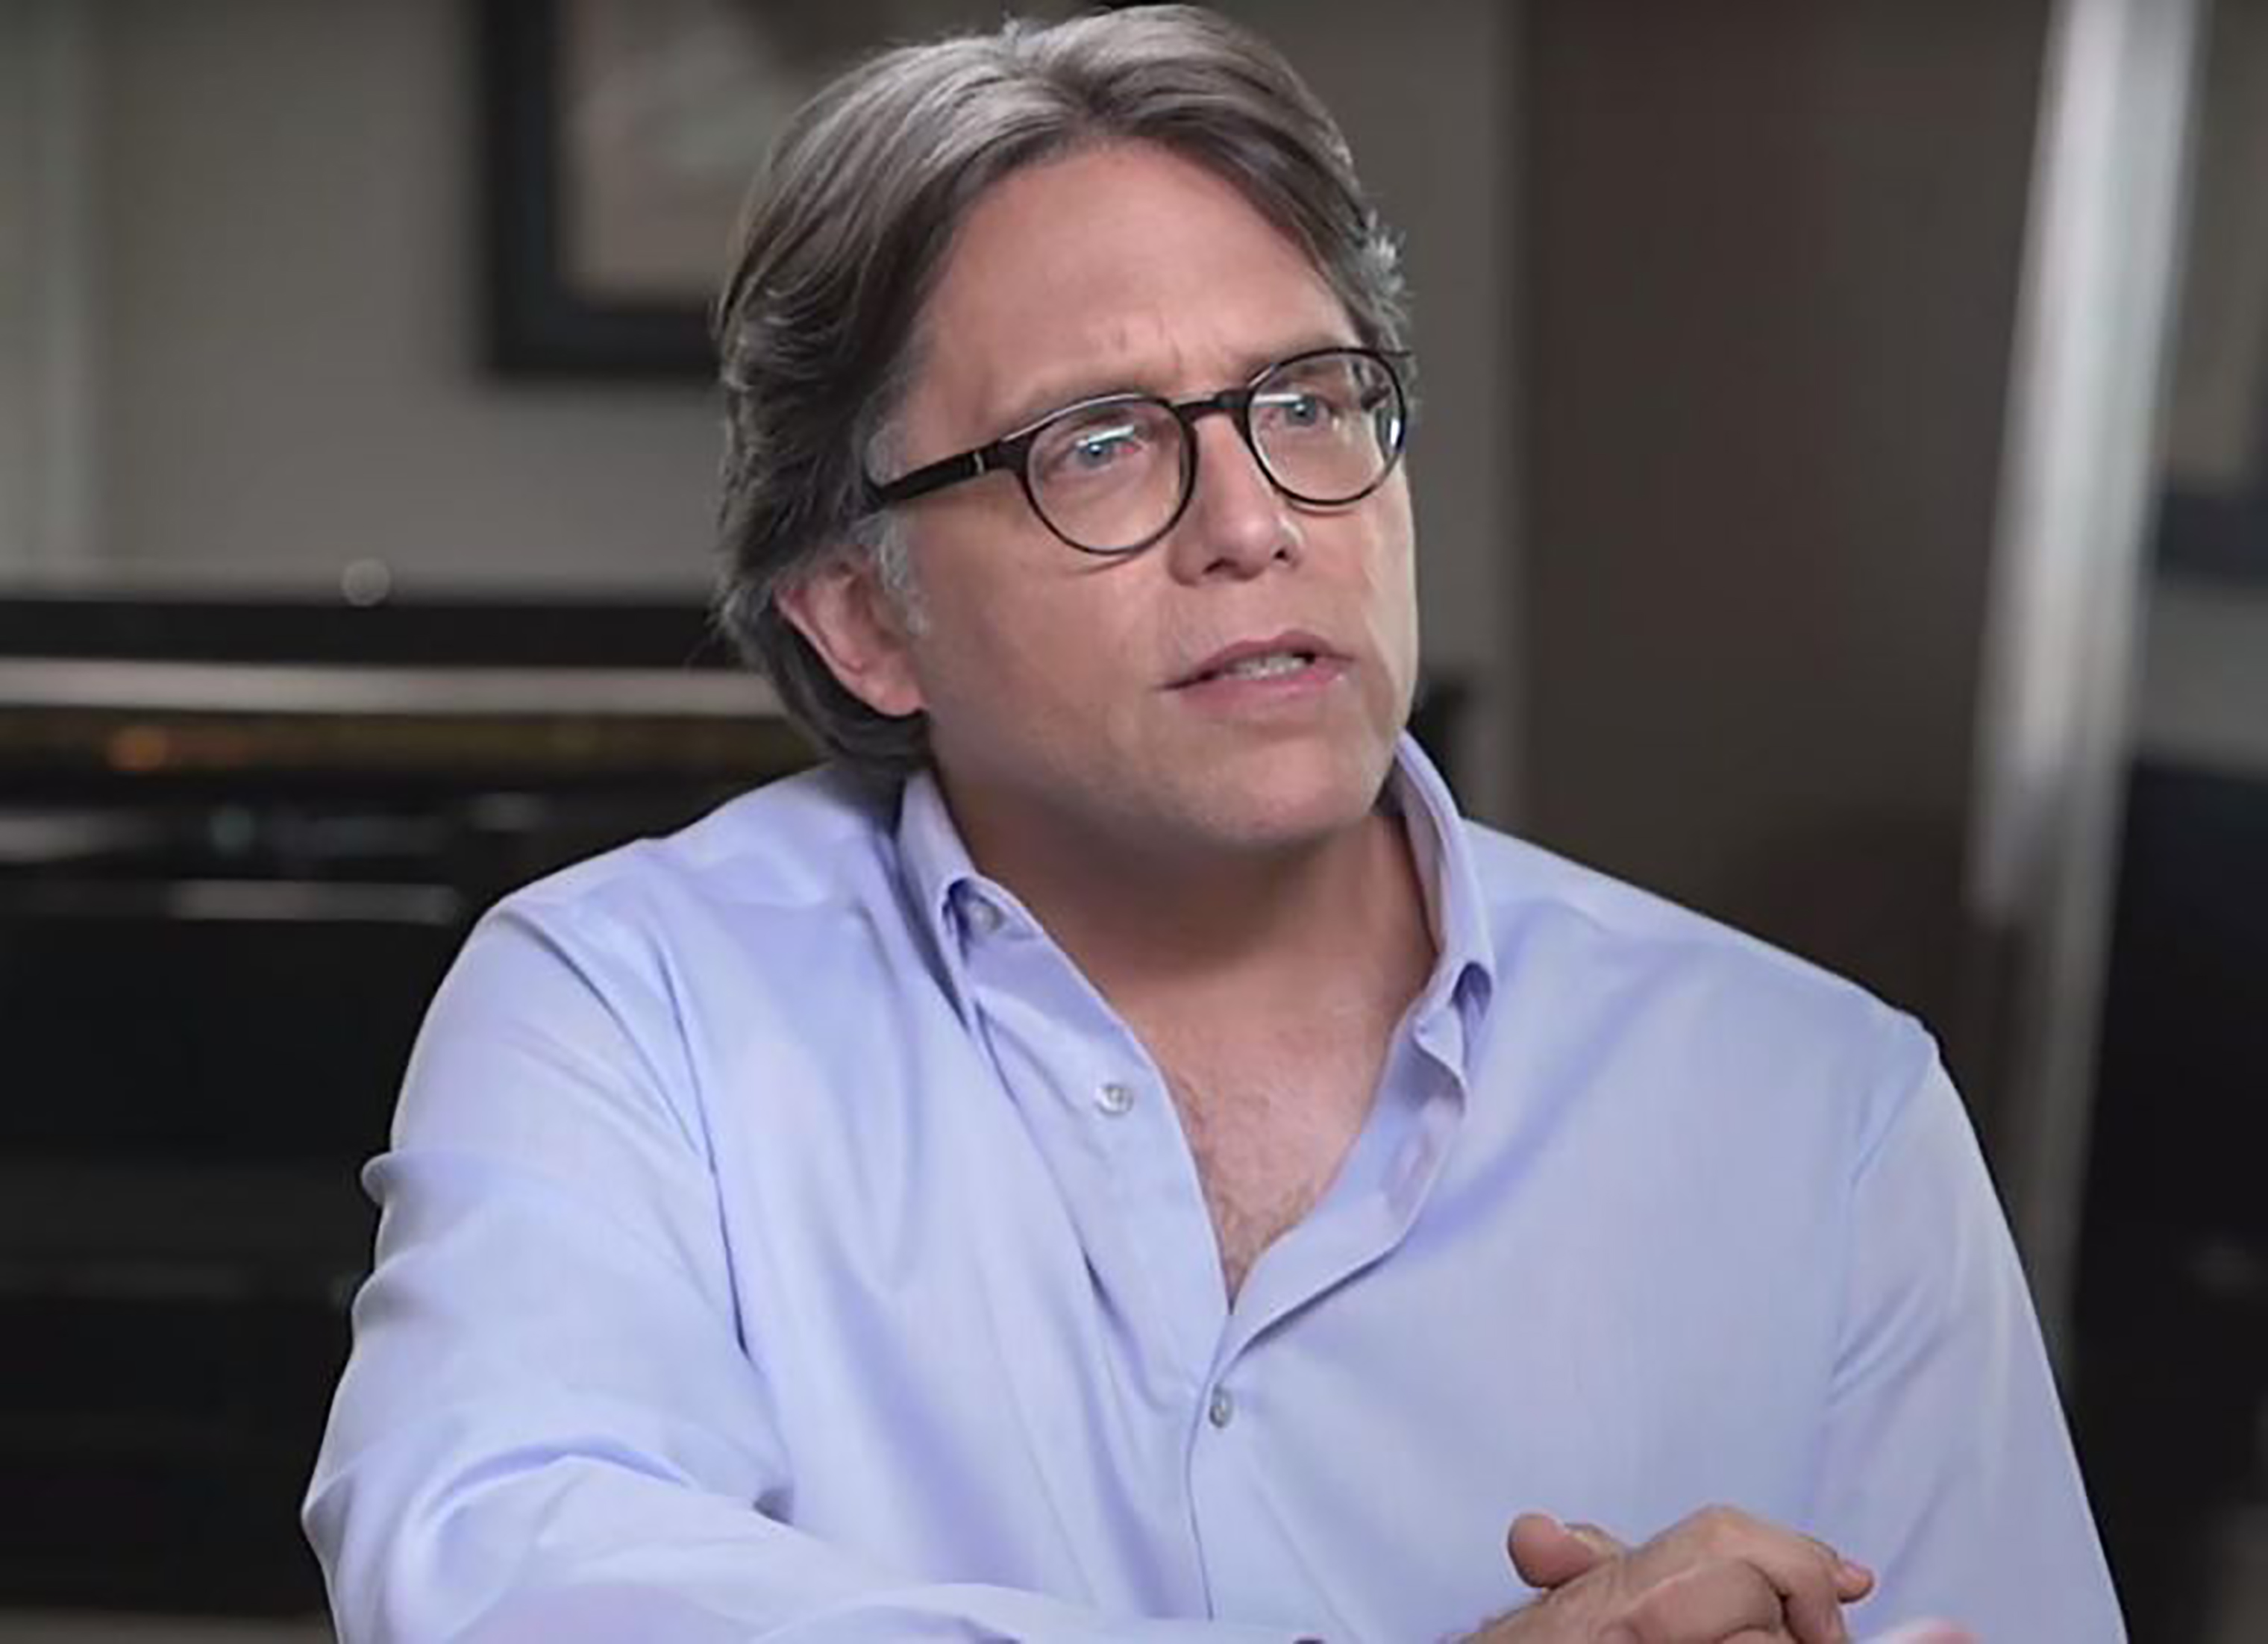 Keith Raniere appears in a YouTube video dated January 26, 2017. The founder of NXIVM has been arrested on charges of sex trafficking. (YouTube/Keith Raniere Conversations)